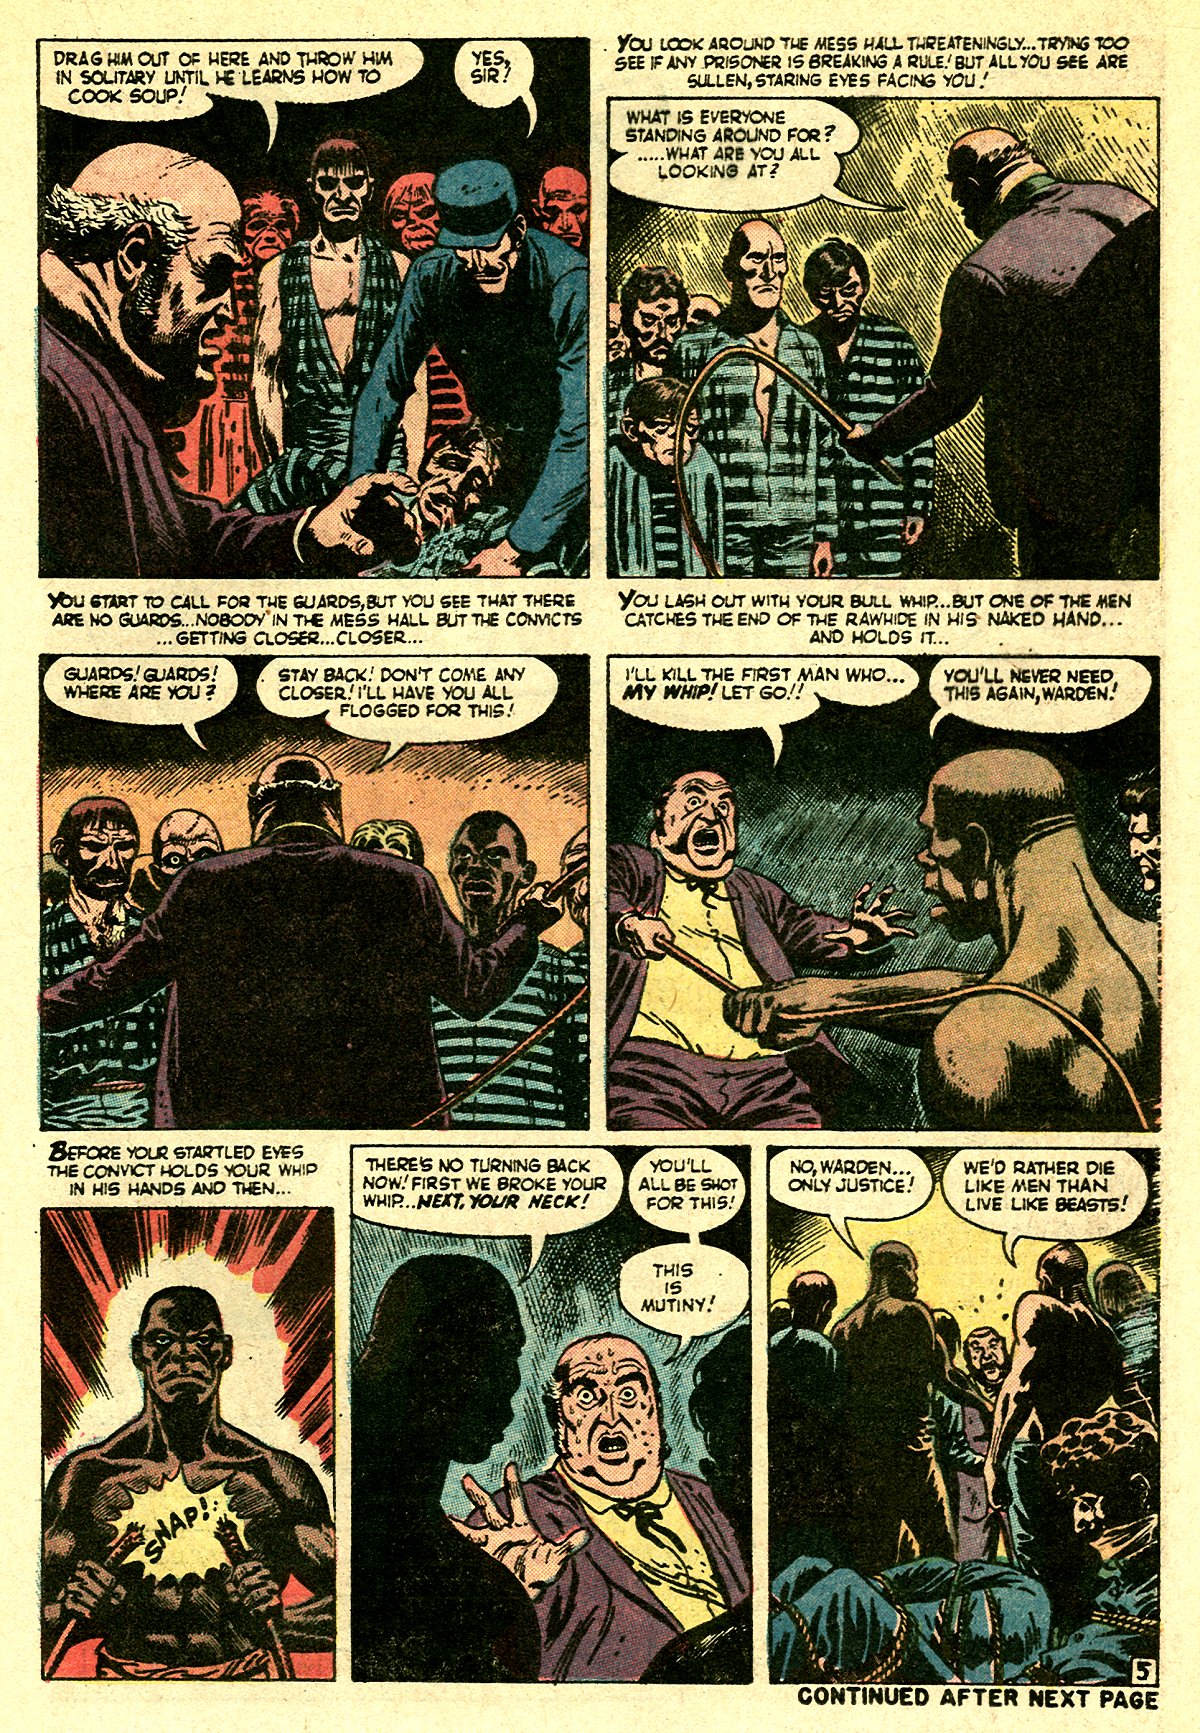 Chamber of Chills (1972) 1 Page 16